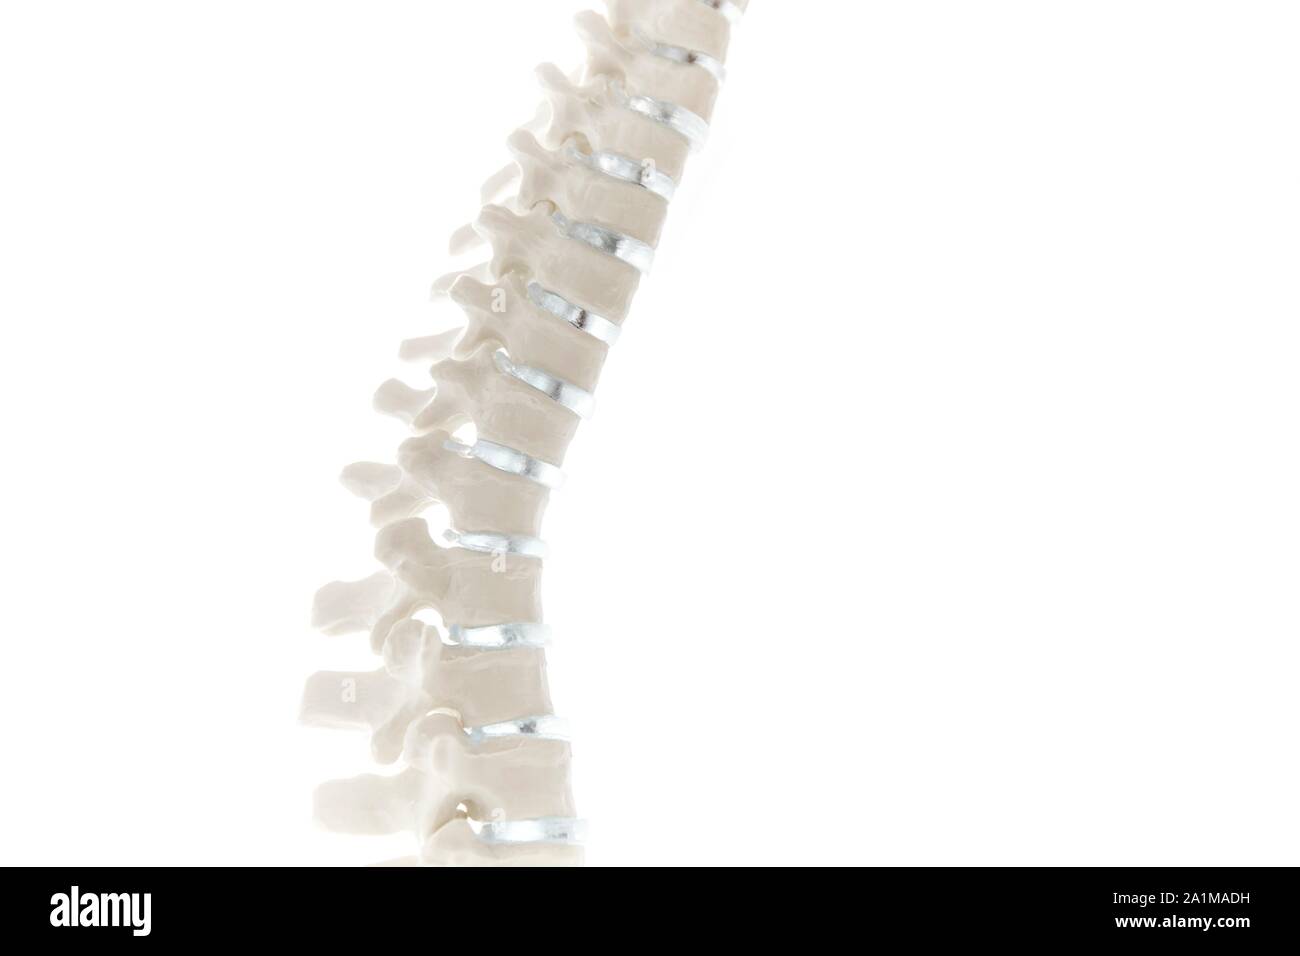 Anatomical spine model, close-up. Stock Photo